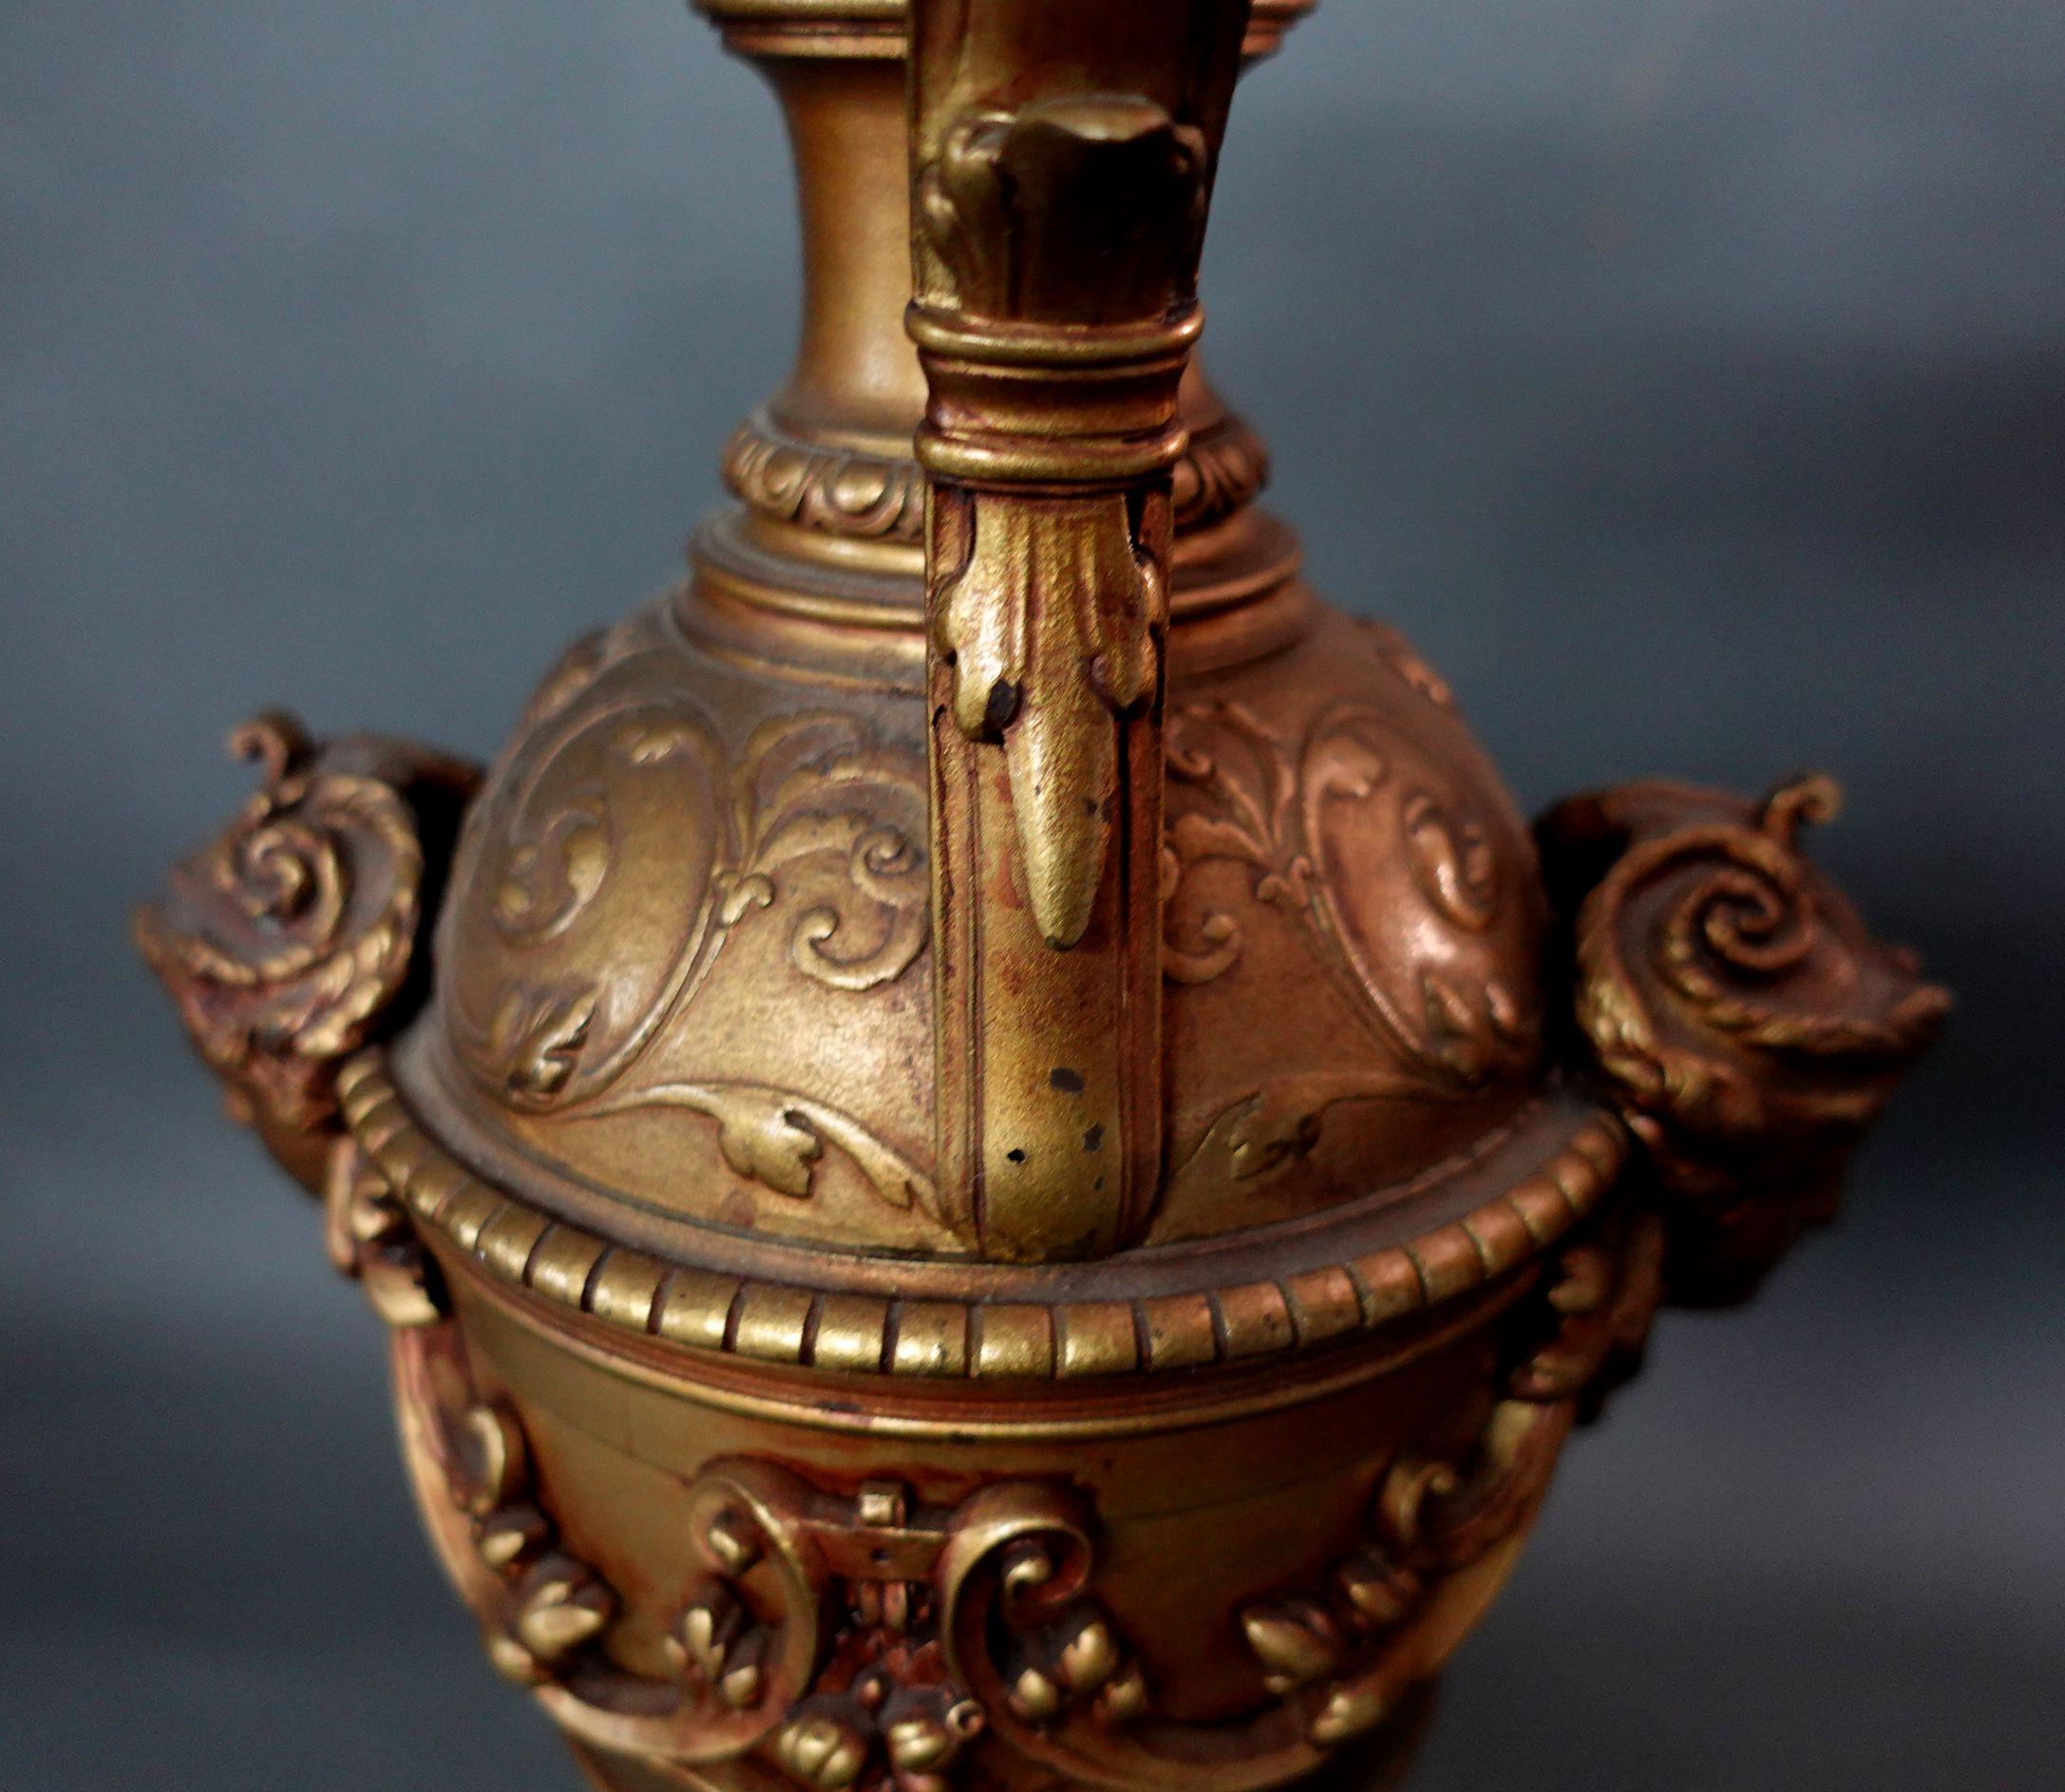 Pair of Neoclassical-Style Gilt-Bronze Urns Lamps on Black Marble Bases For Sale 4